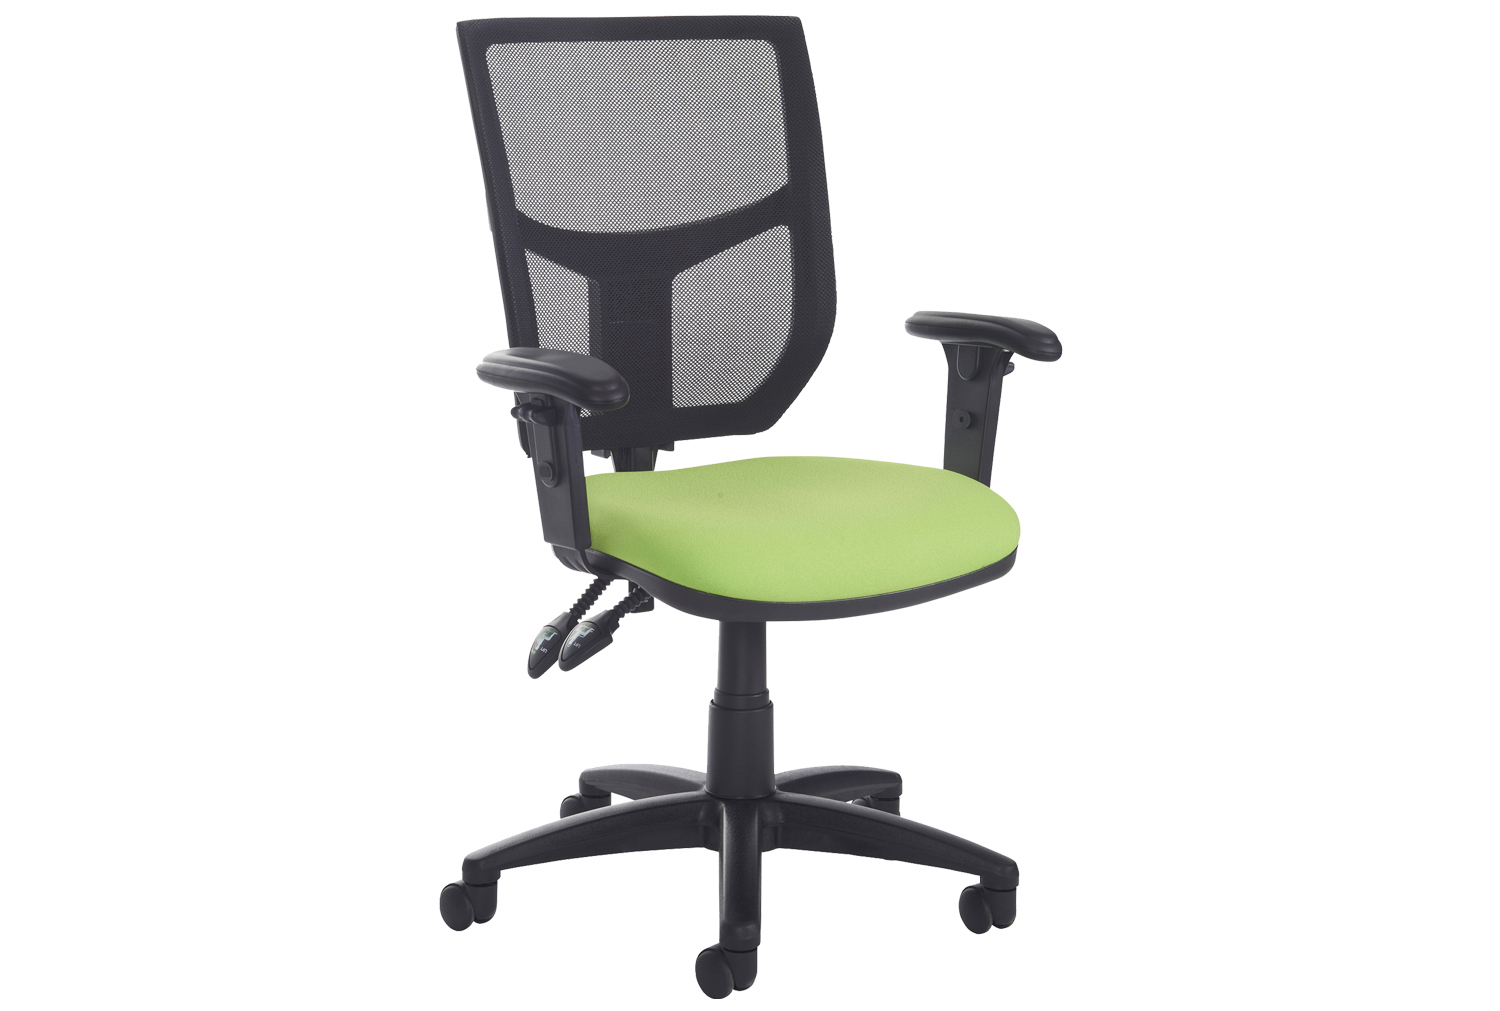 Gordy 2 Lever Mesh Back Operator Office Chair With Adjustable Arms, Havana